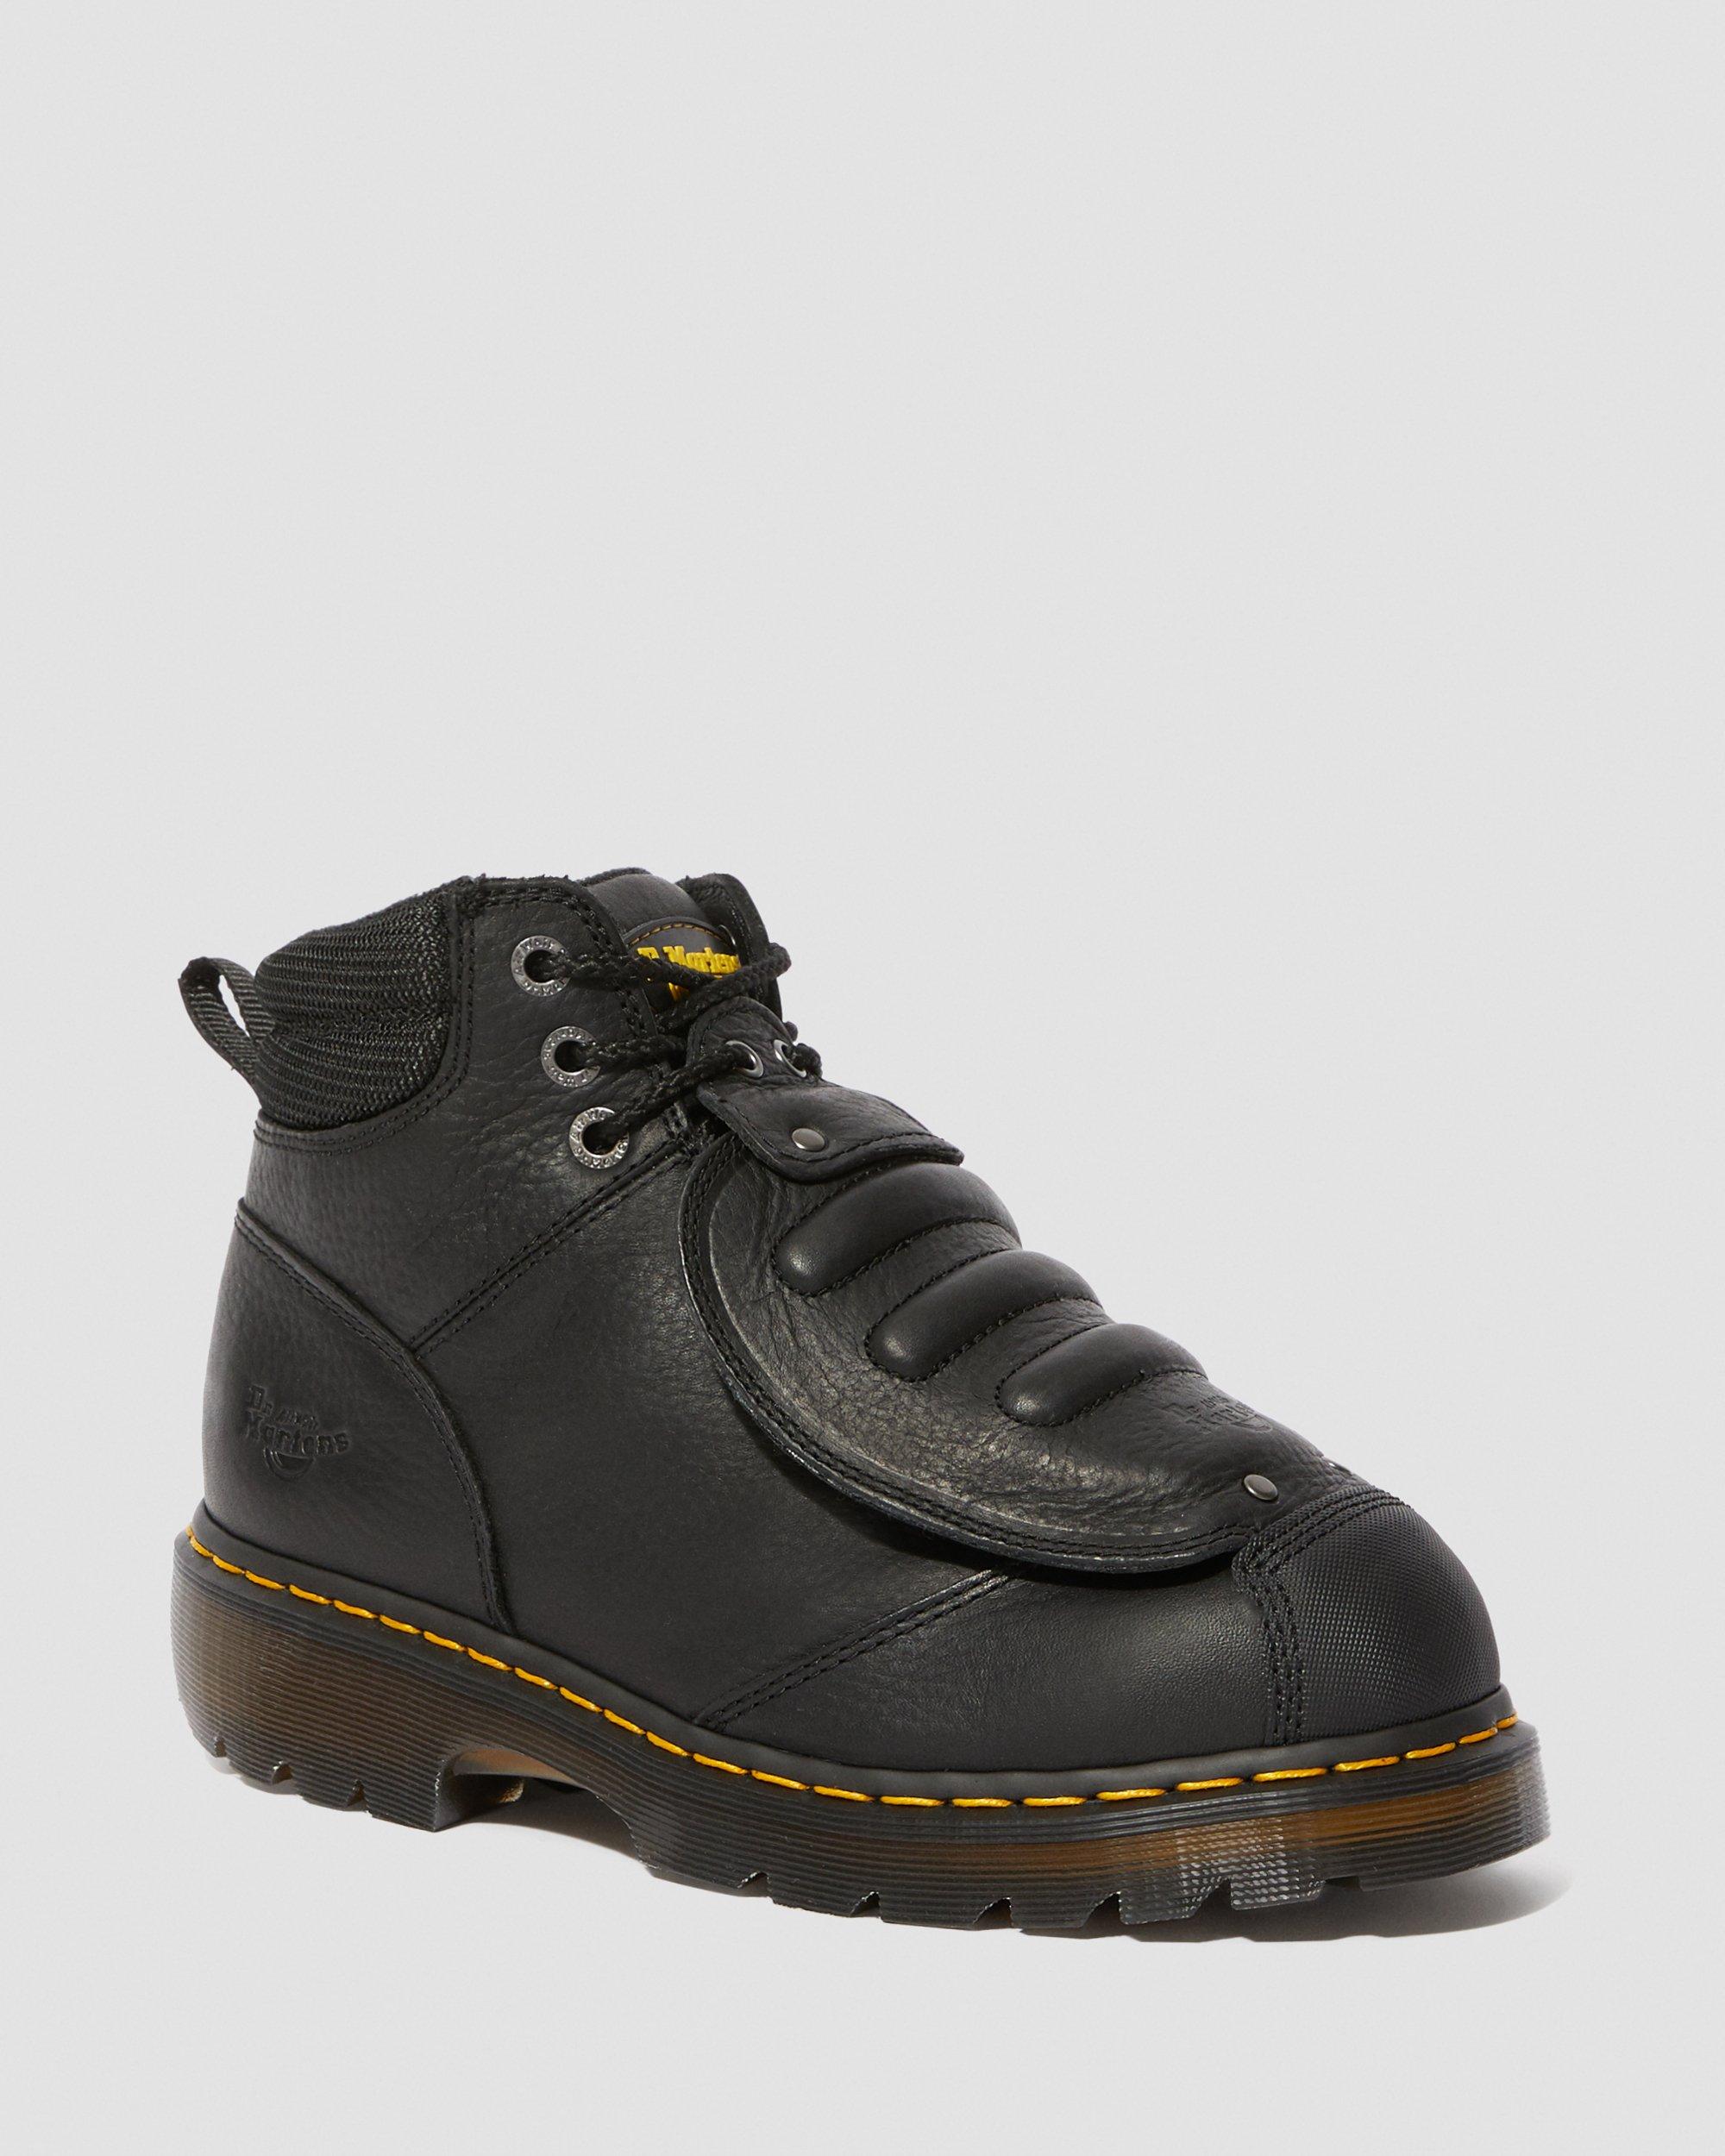 Ironbridge Grizzly Leather Met Guard Work Boots in Black